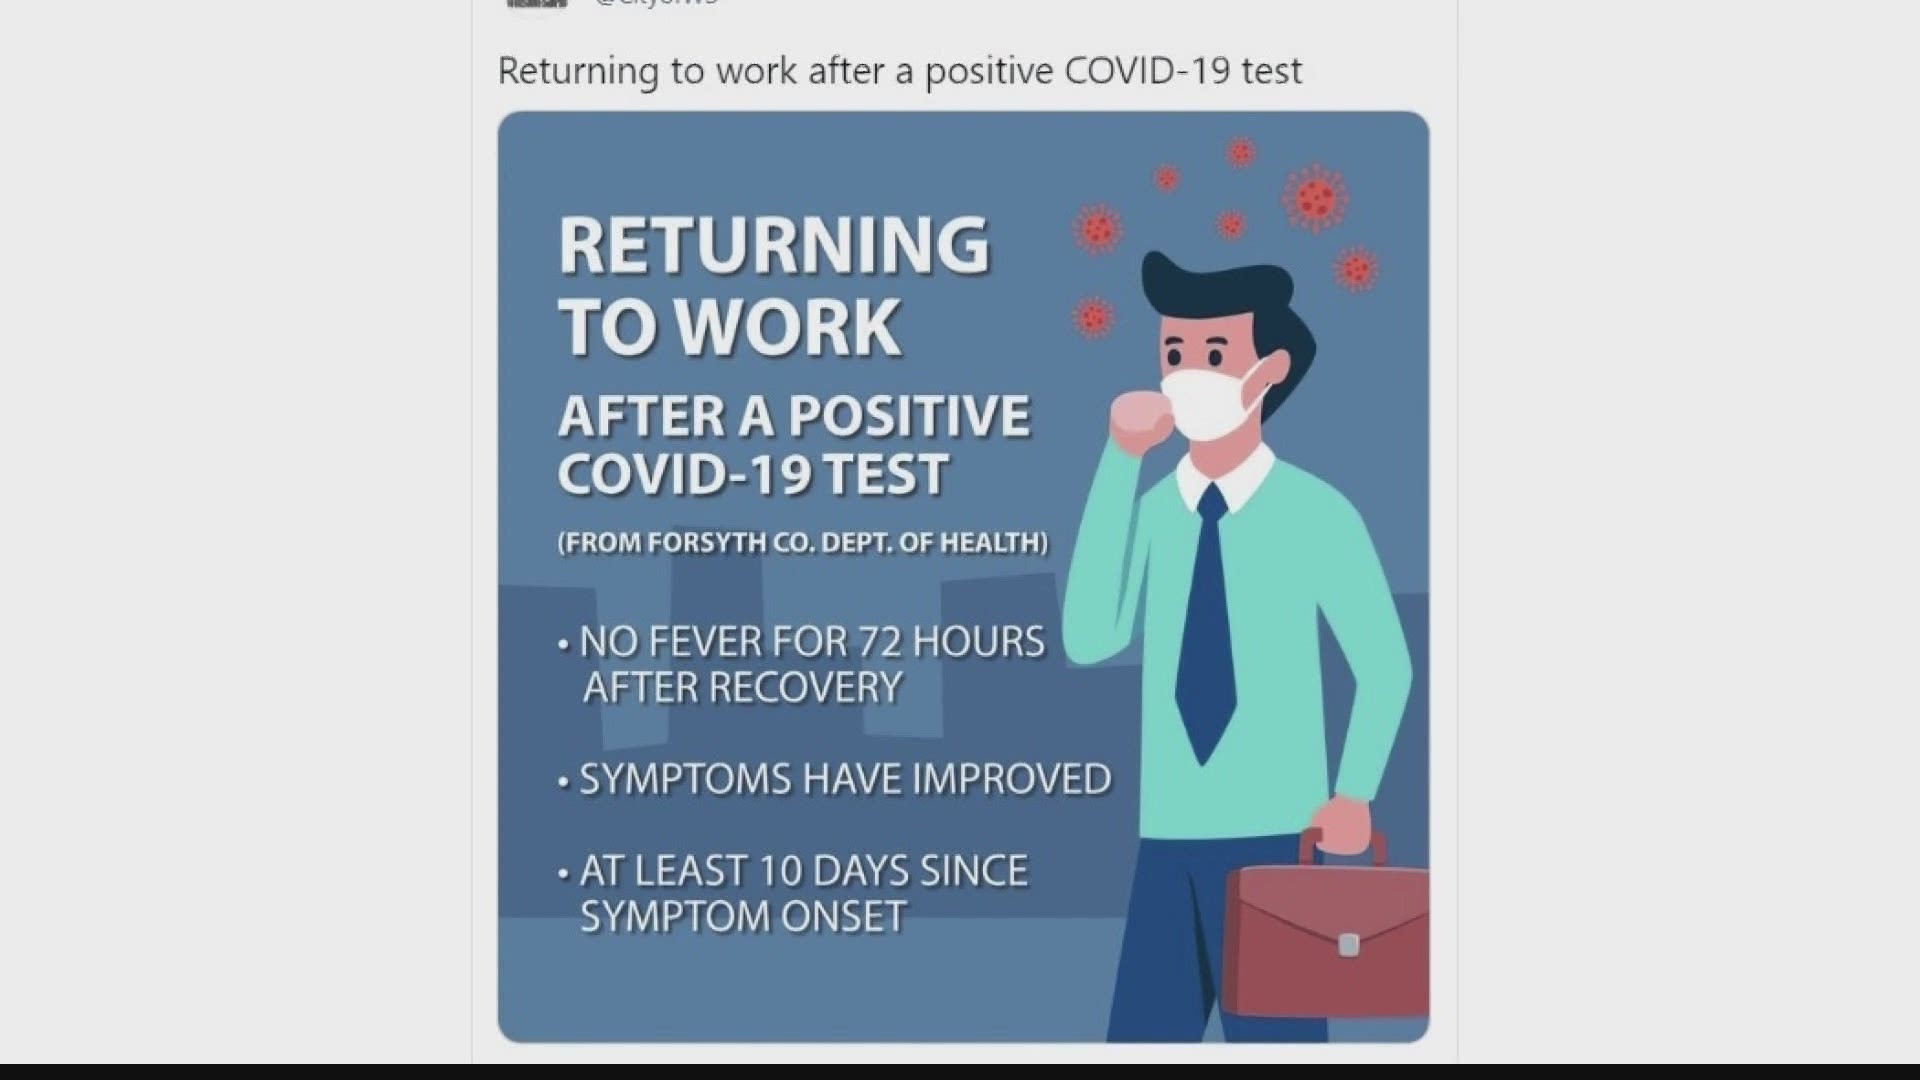 With other viruses, once you no longer have a fever you can go to work. With COVID, the timeline is different.